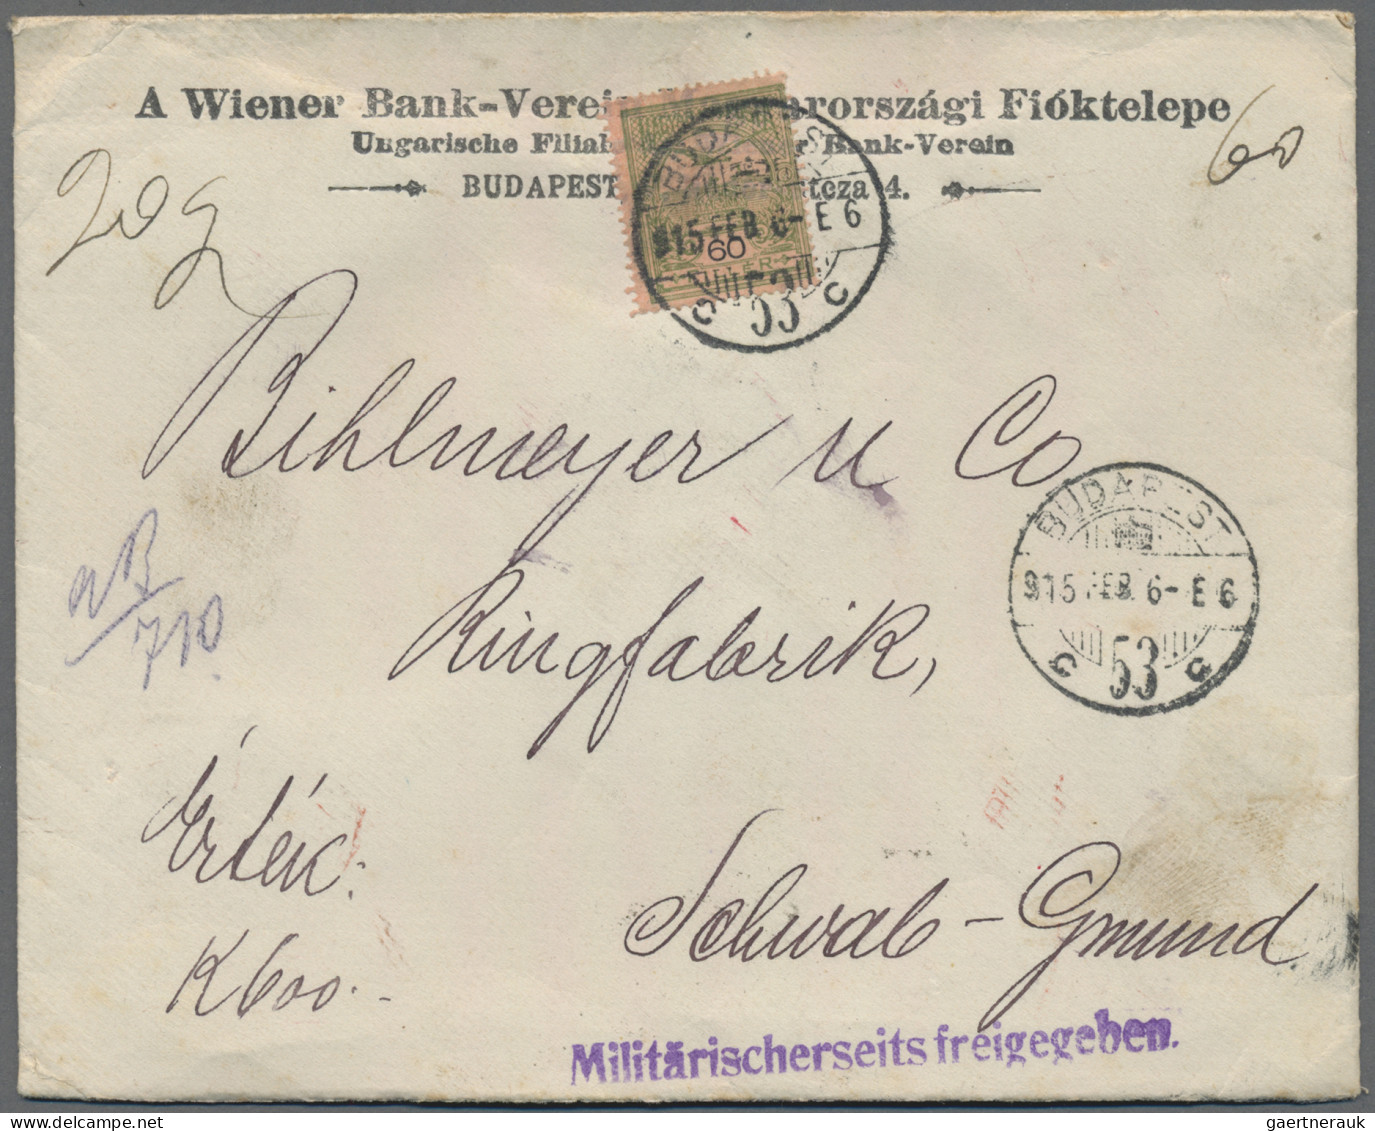 Hungary: 1896/1928, petty collection of 15 covers/cards/parcel despatch forms se